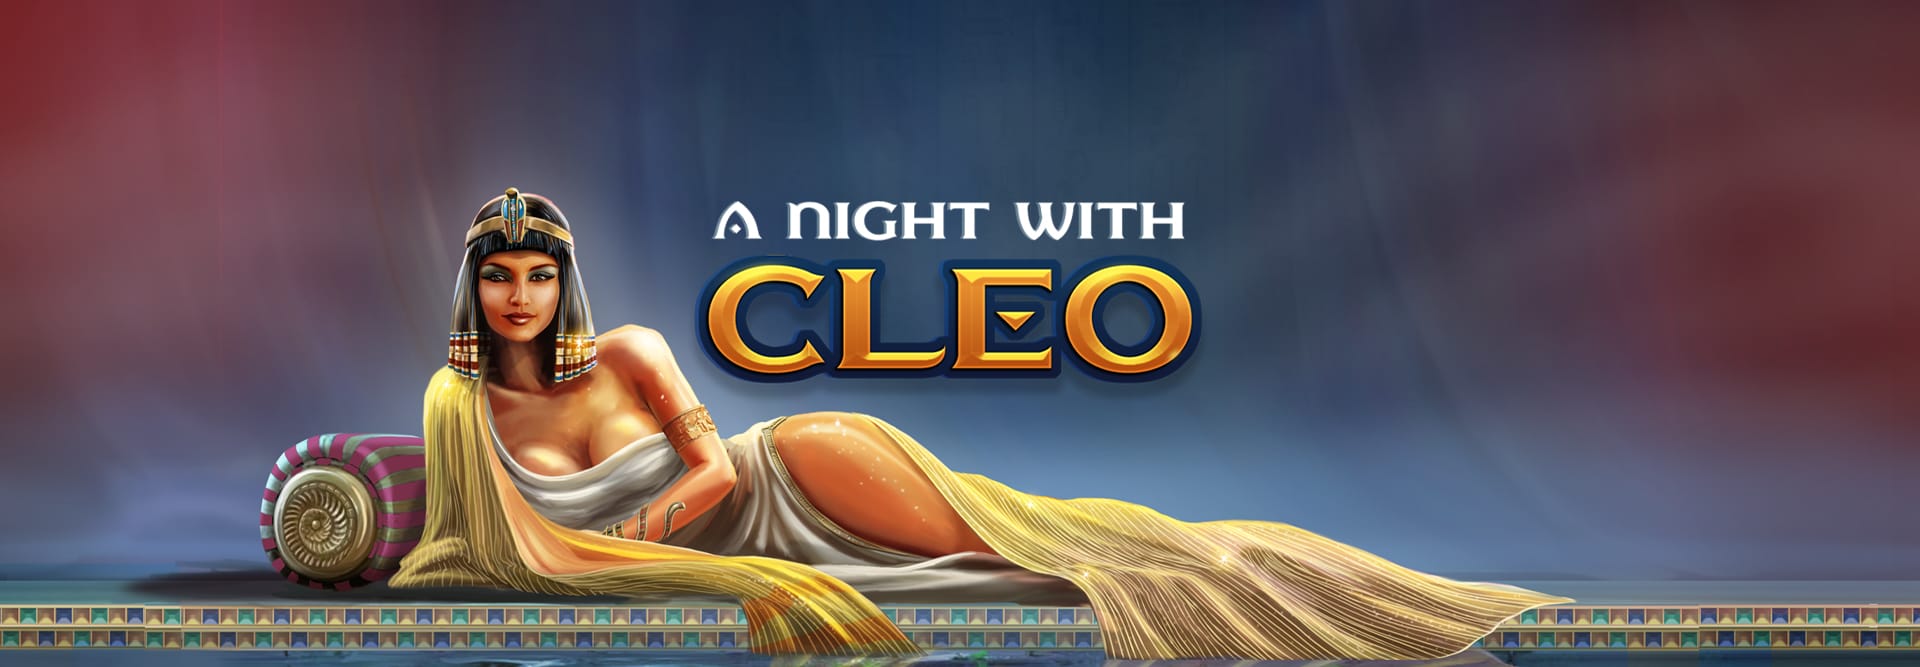 A night with cleo banner